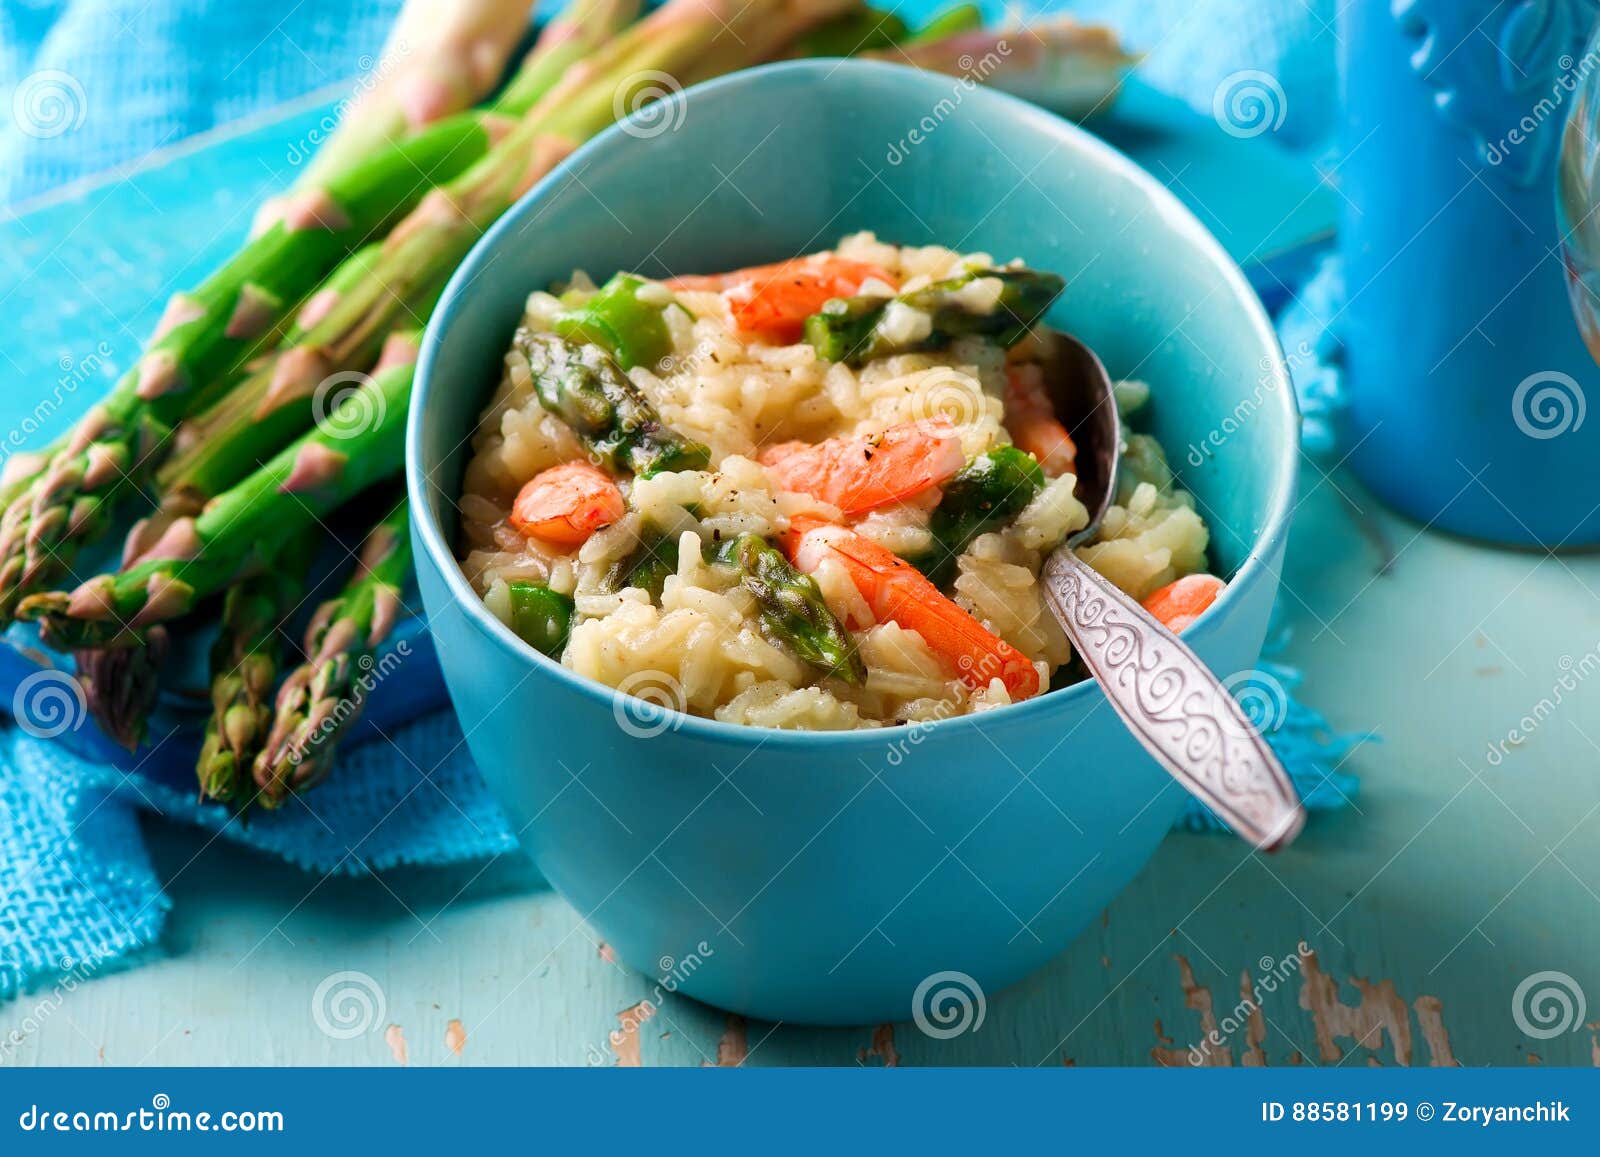 Asparagus and Shrimp Risotto in Blue Dish Stock Image - Image of ...